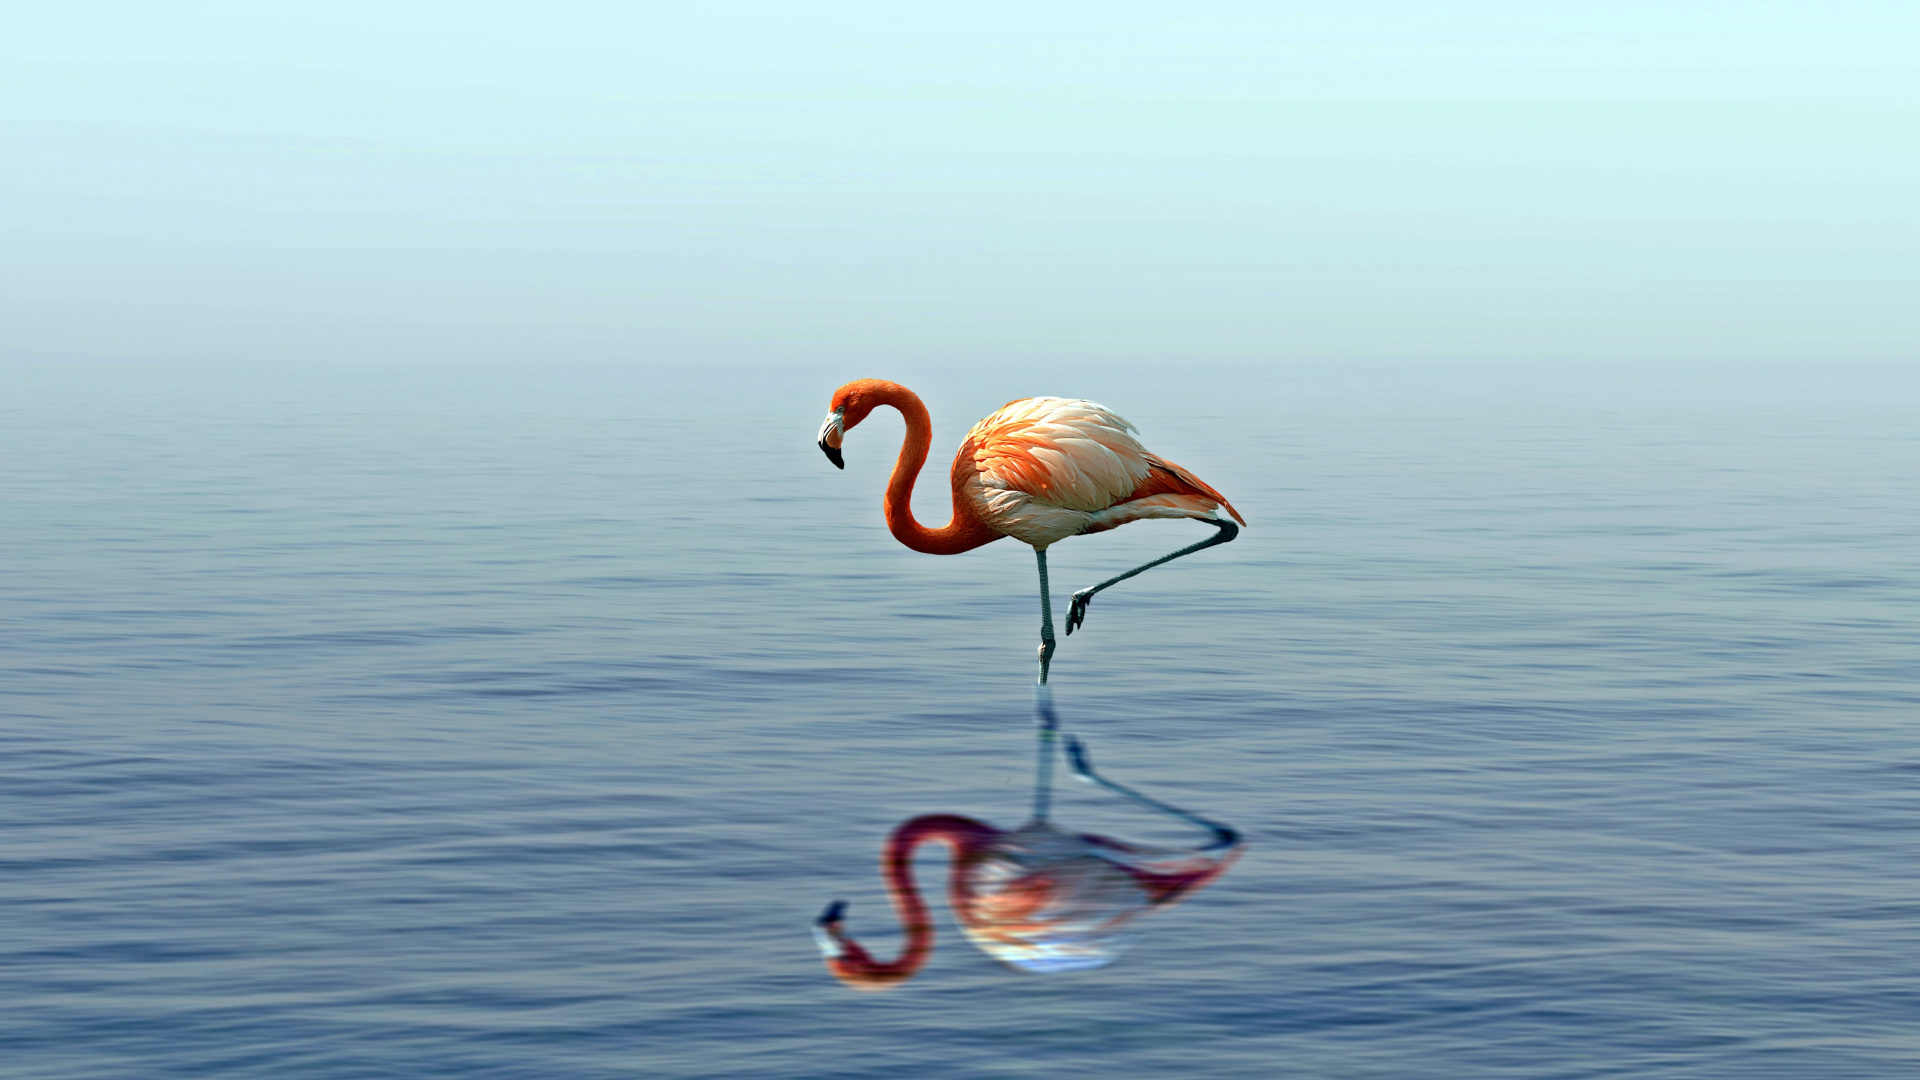 Pink Flamingo on Water During Daytime. Wallpaper in 1920x1080 Resolution